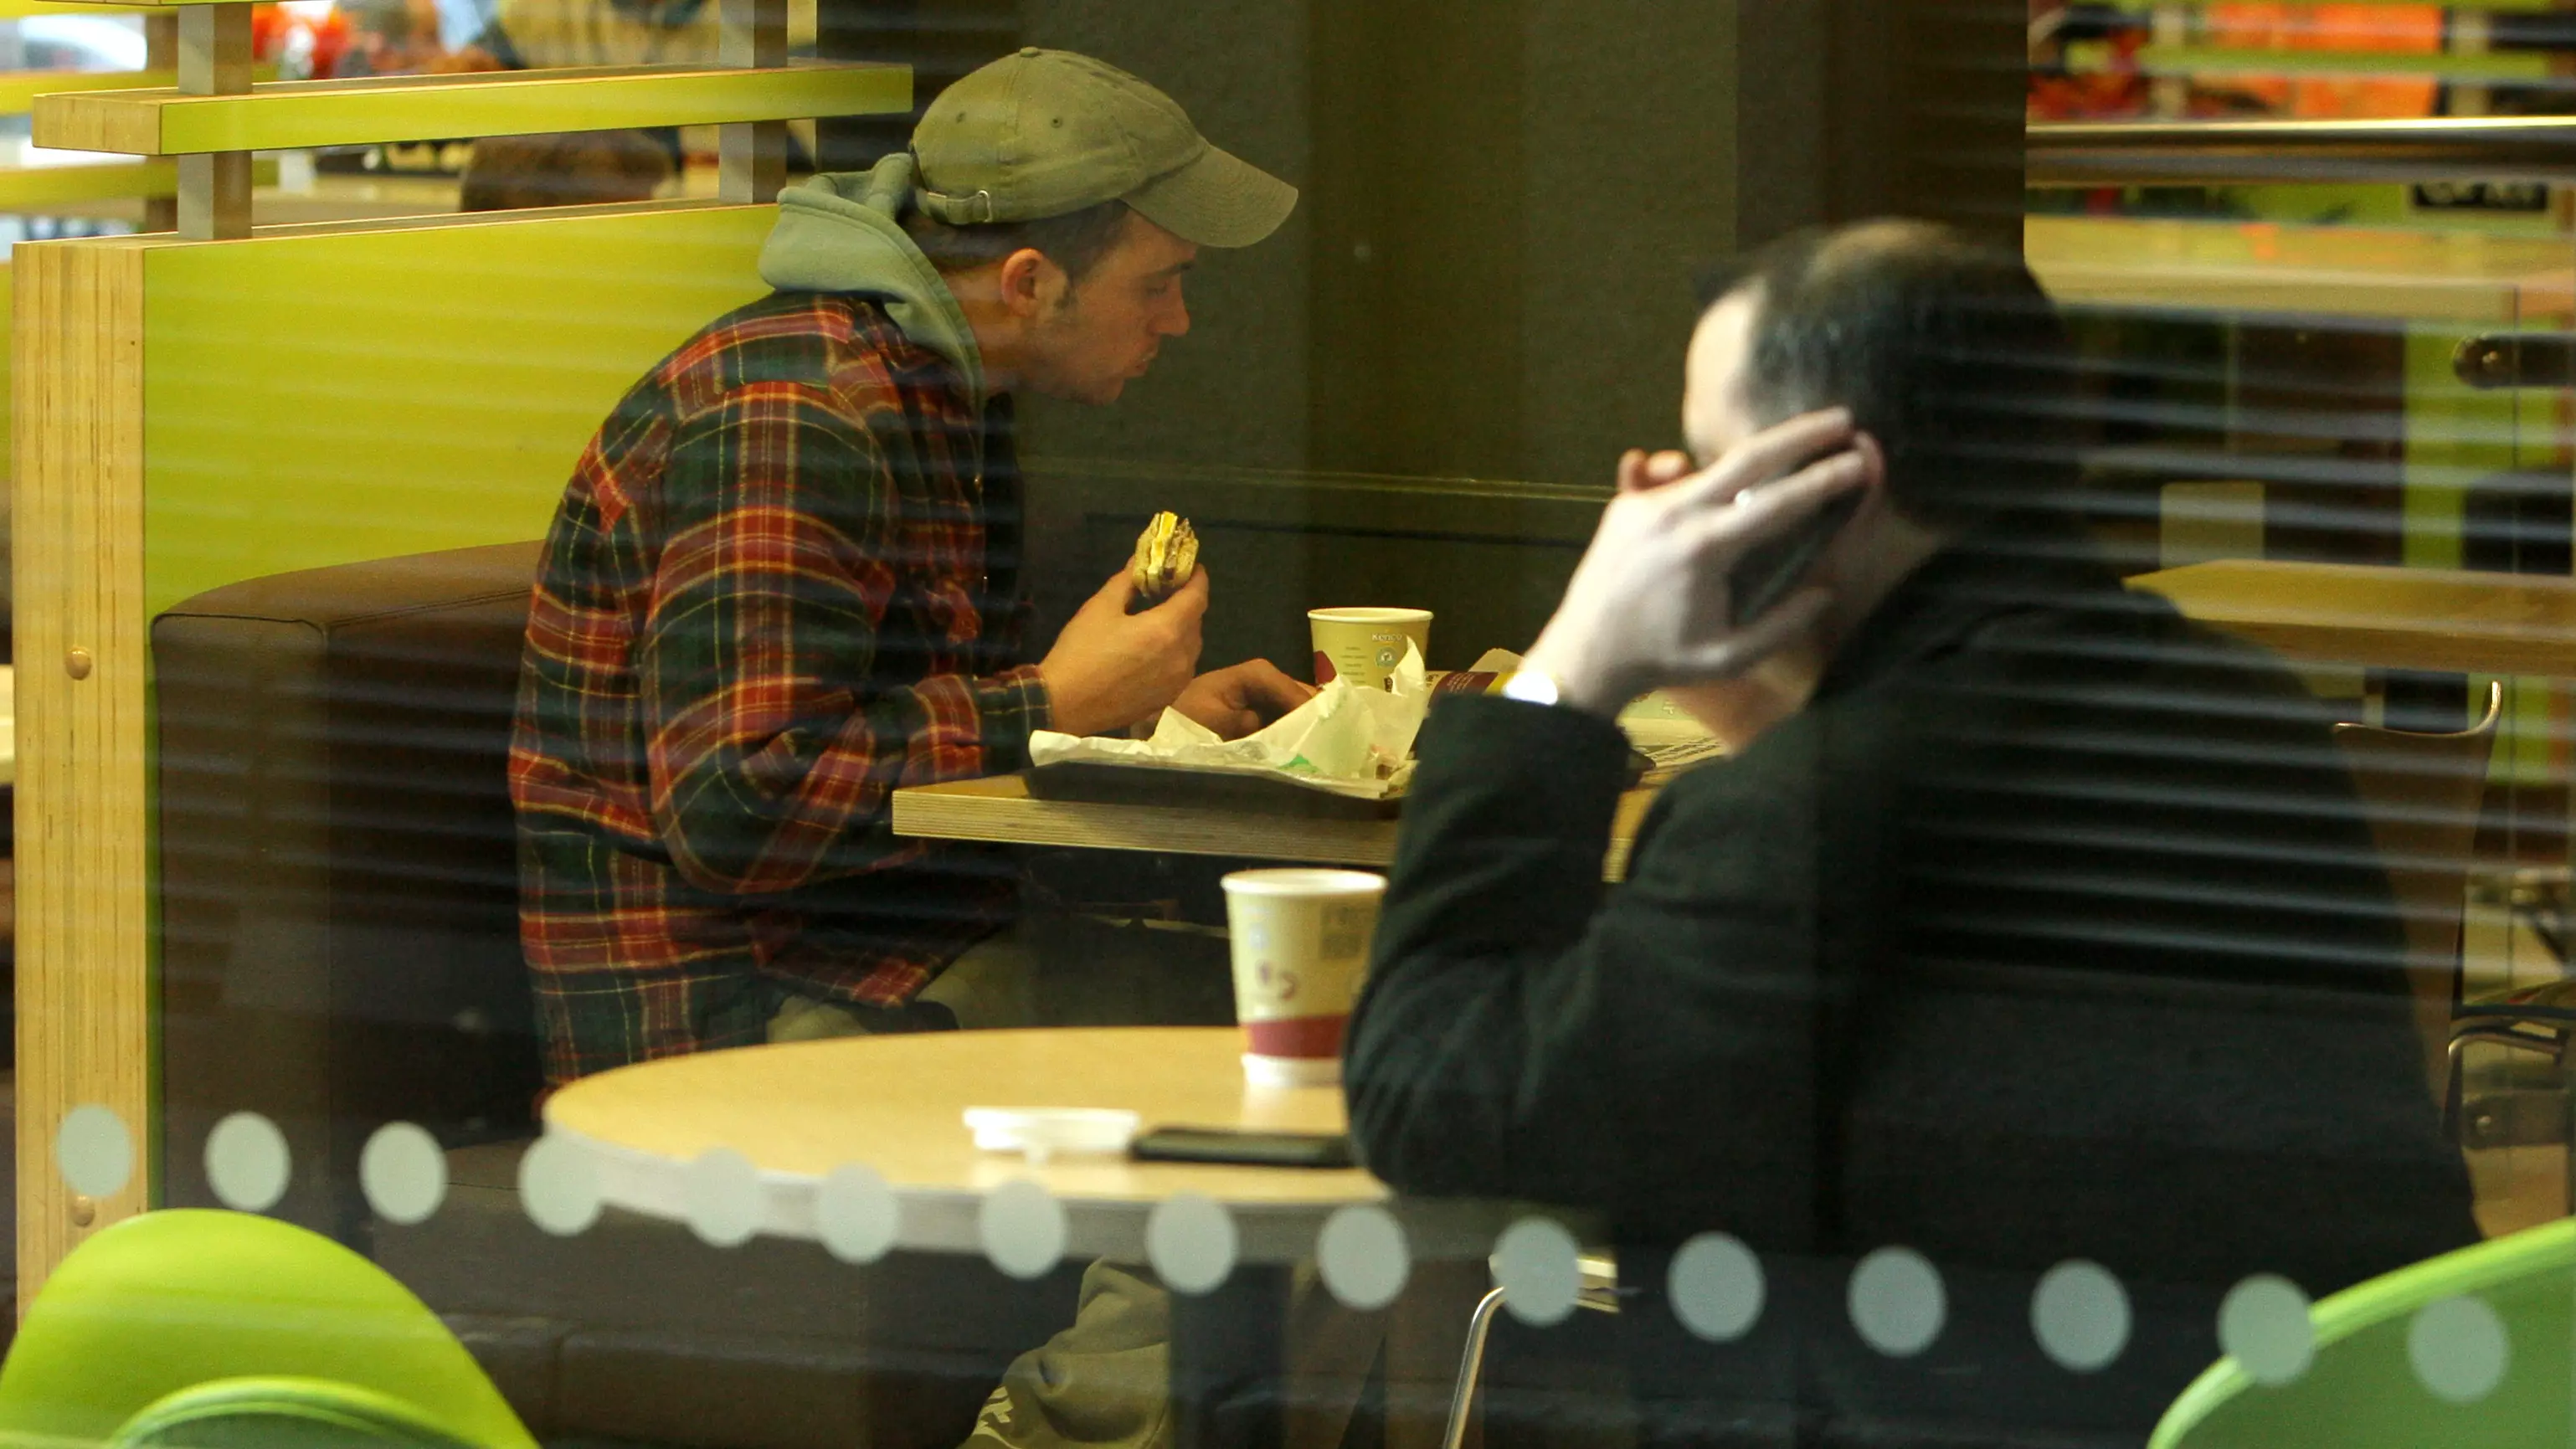 One In 10 Adults Thinks Their Partner Eating McDonald's Without Them Is As Bad As Cheating